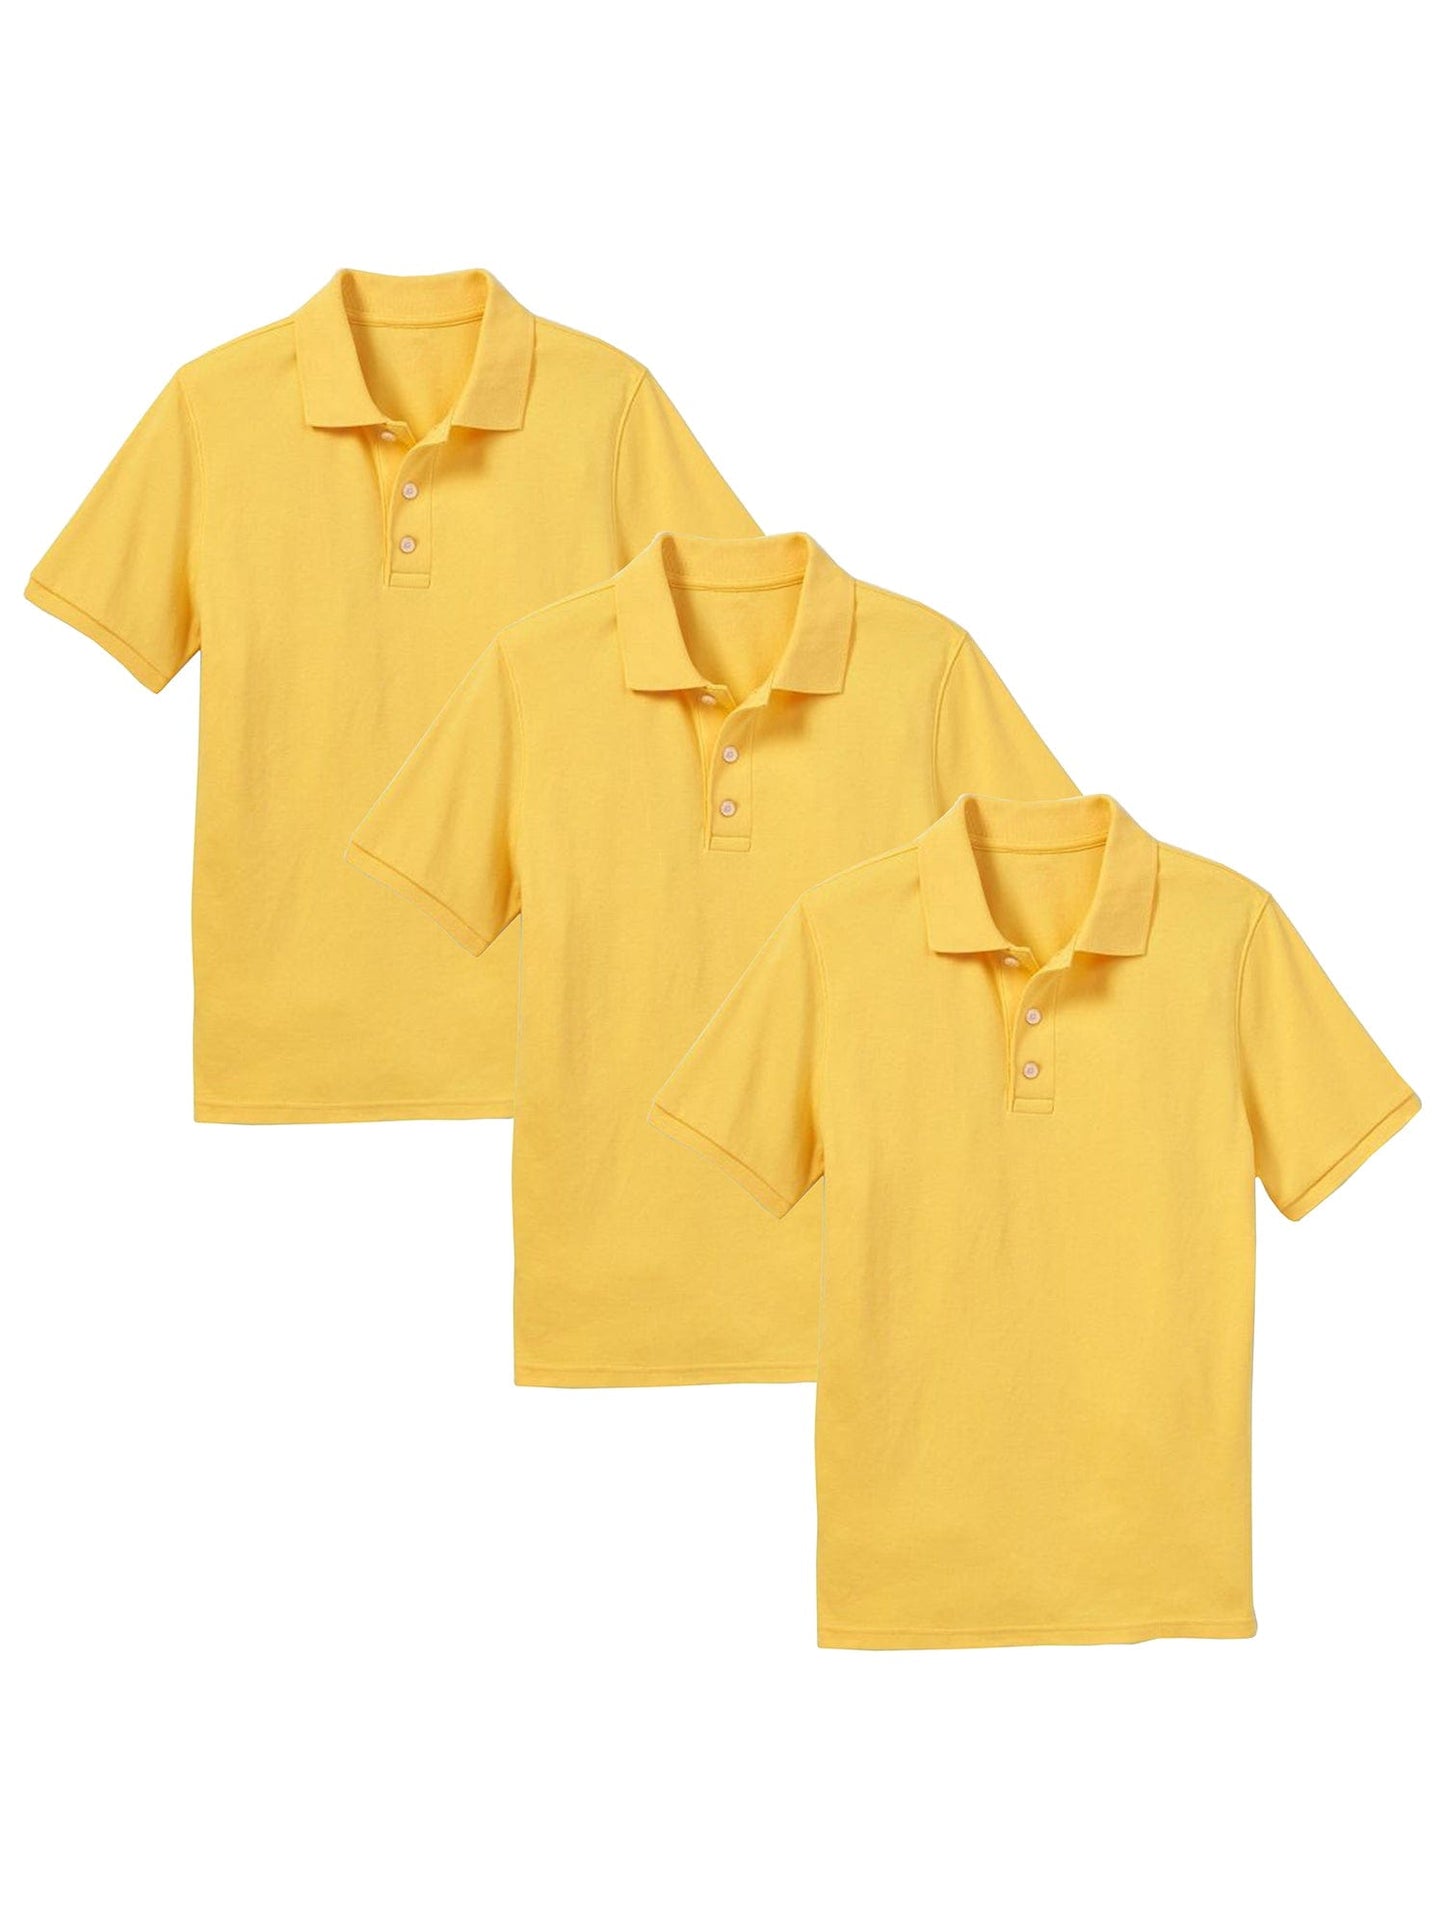 Young Boy's (3-PACK) Short Sleeve Polo Shirt (Sizes 4-7) - GalaxybyHarvic